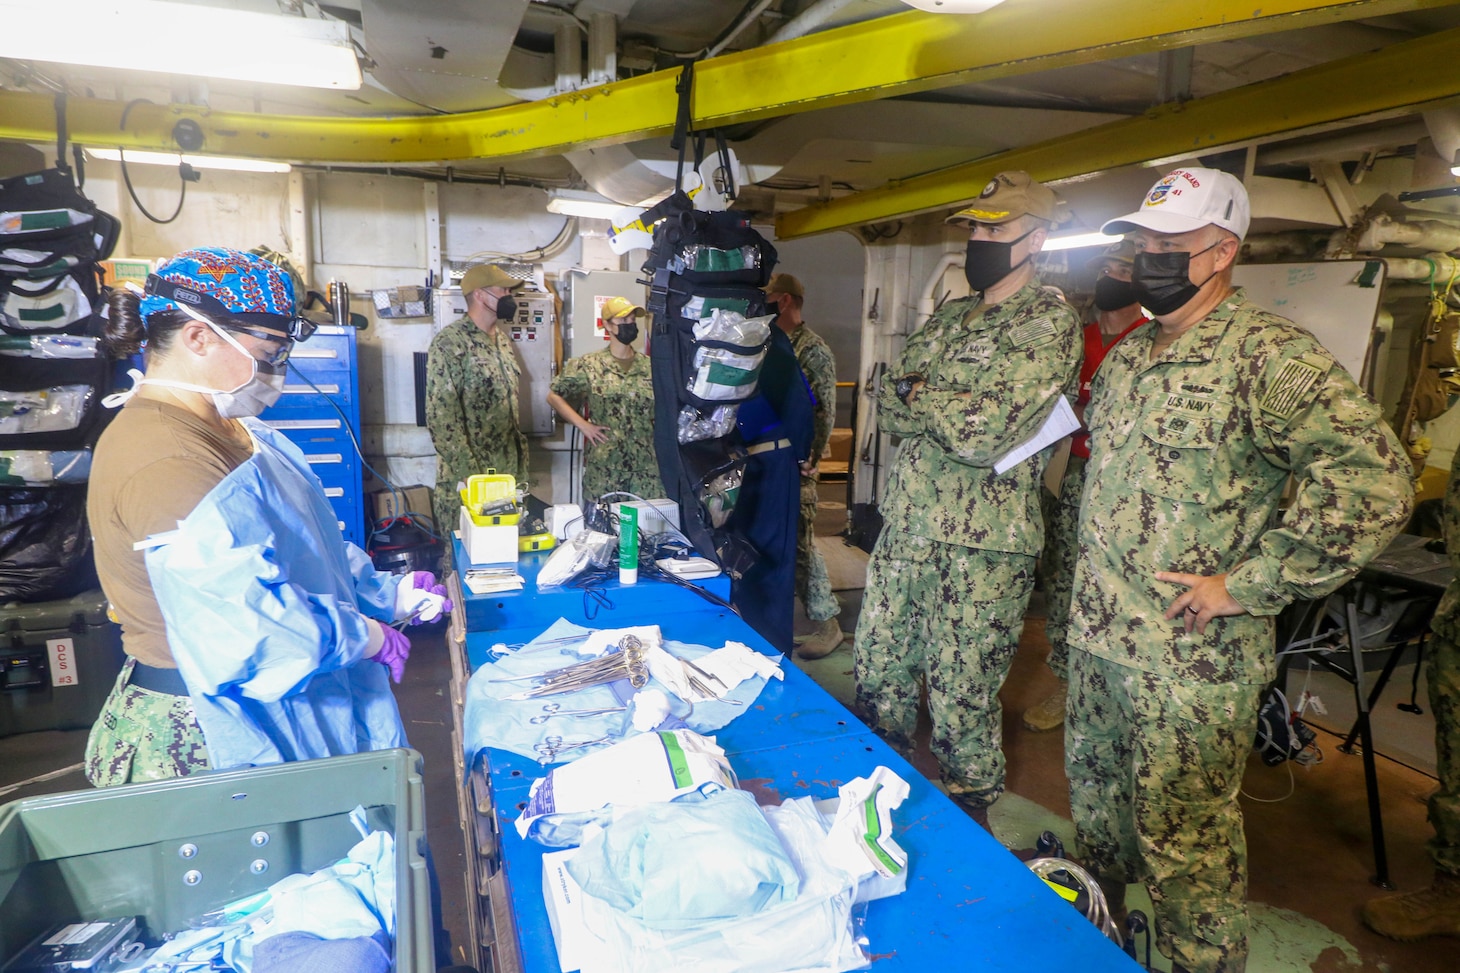 NAVAL STATION NORFOLK (Aug. 14, 2021) – Rear Adm. Darin Via, commander, Naval Medical Forces Atlantic, right, observes members of Fleet Surgical Team 4 in the operating room aboard the dock landing ship USS Whidbey Island (LSD 41), the lead ship of its class of the same name, during a mass casualty drill in support of Large Scale Exercise (LSE) 2021. LSE 2021 demonstrates the Navy's ability to employ precise, lethal, and overwhelming force globally across three naval component commands, five numbered fleets, and 17 time zones. (U.S. Navy photo by Ens. Drew Hendricks)